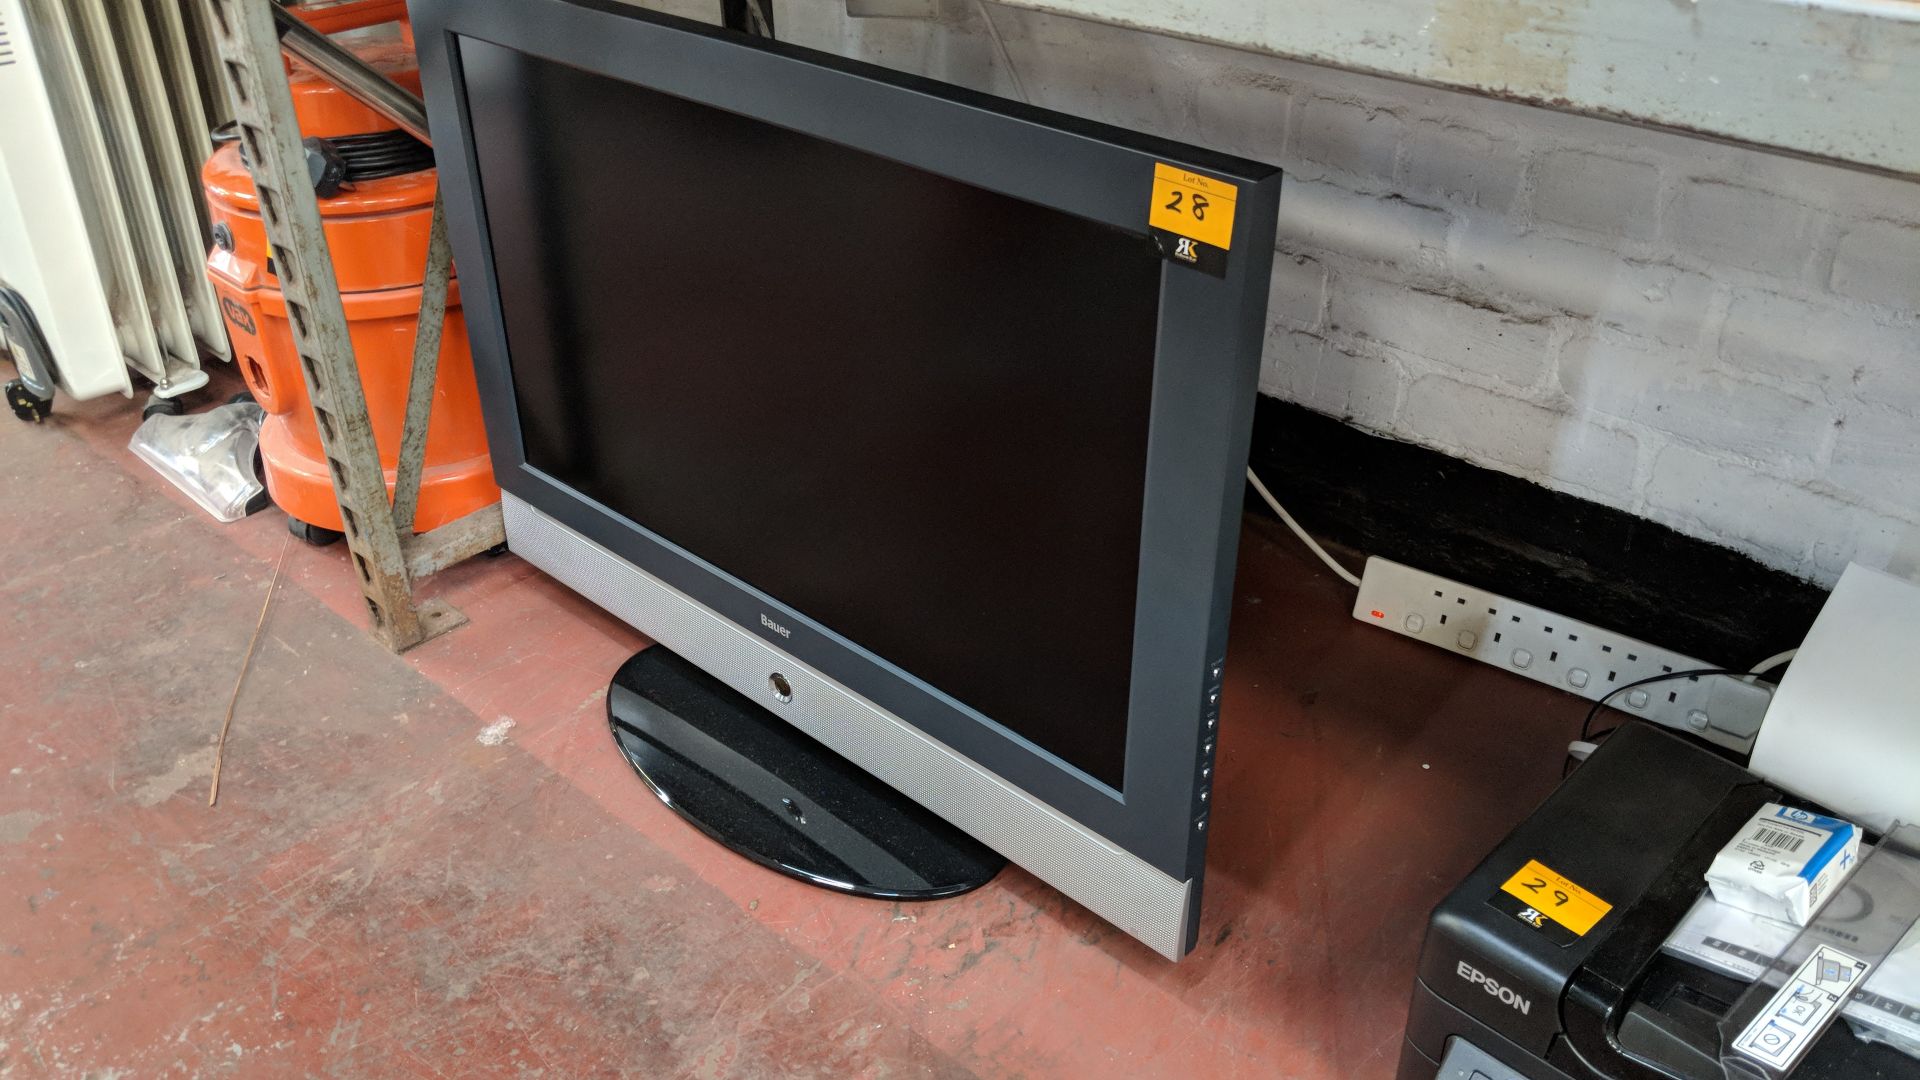 Bauer 32" LCD TV IMPORTANT: Please remember goods successfully bid upon must be paid for and - Image 2 of 2